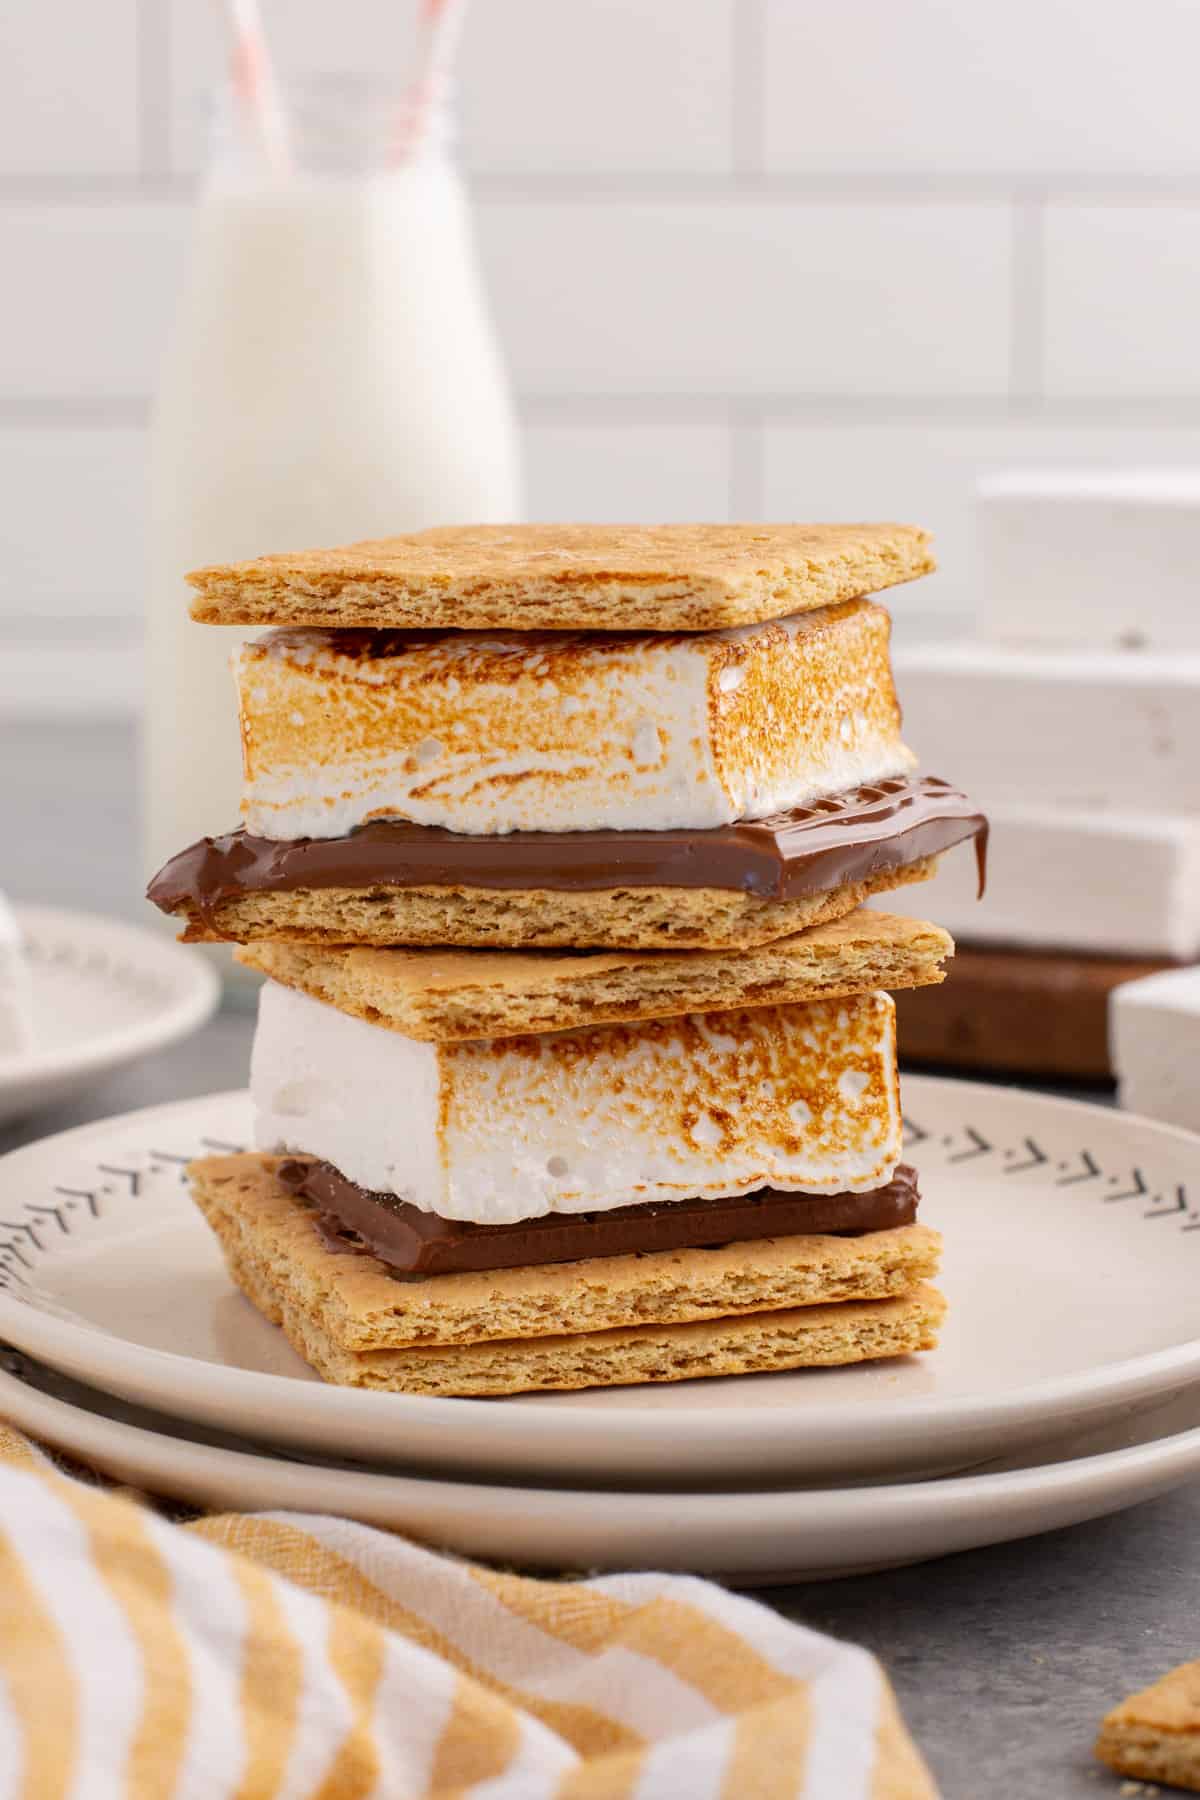 S'mores with homemade marshmallows.